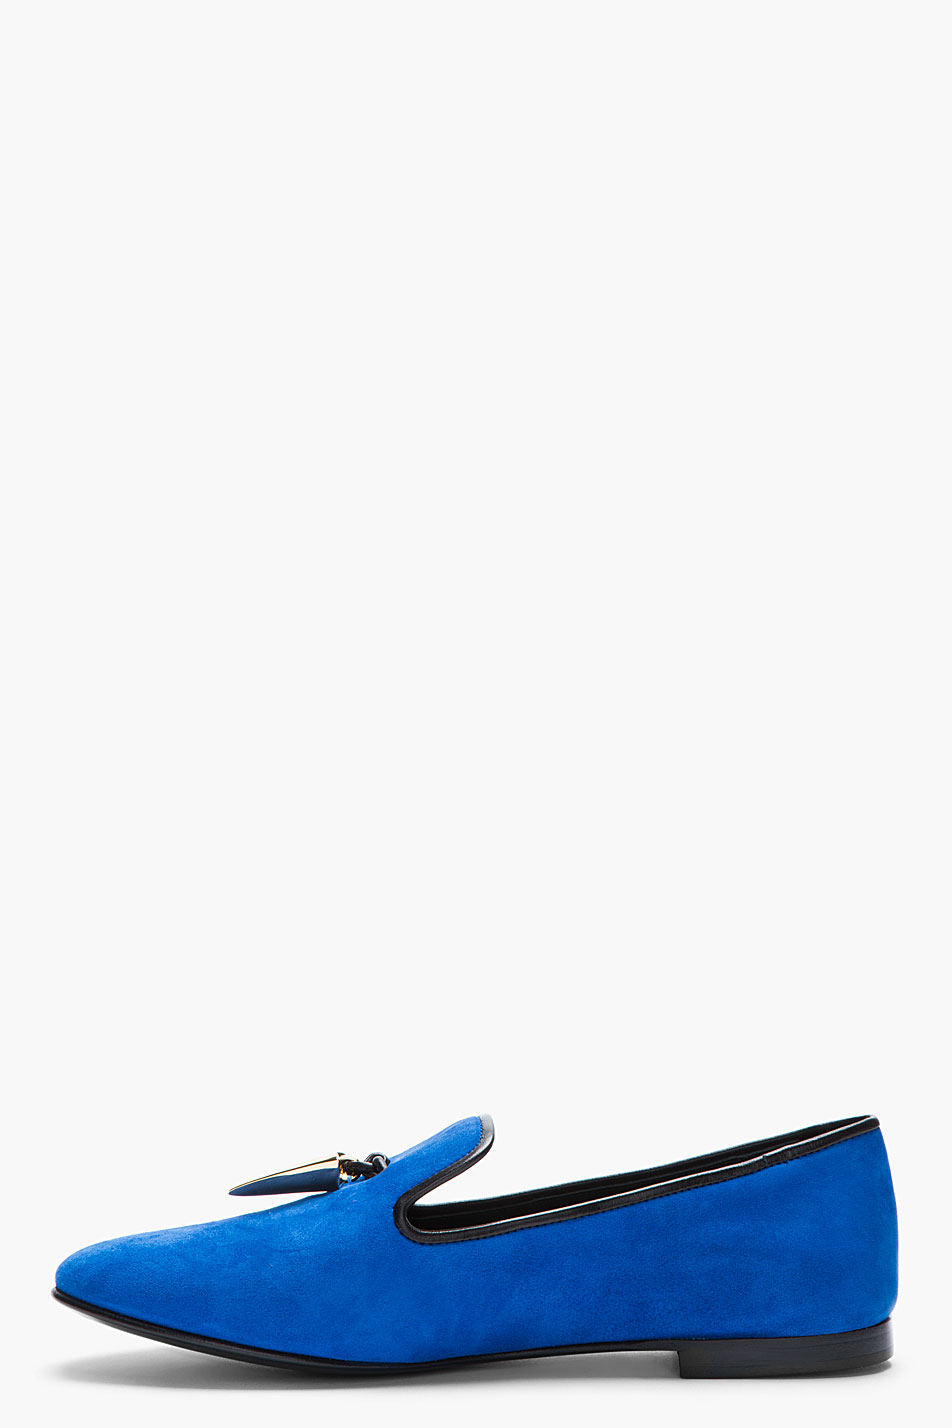 Giuseppe Zanotti Royal Blue and Gold Horn Dalila Suede Loafers - Lyst